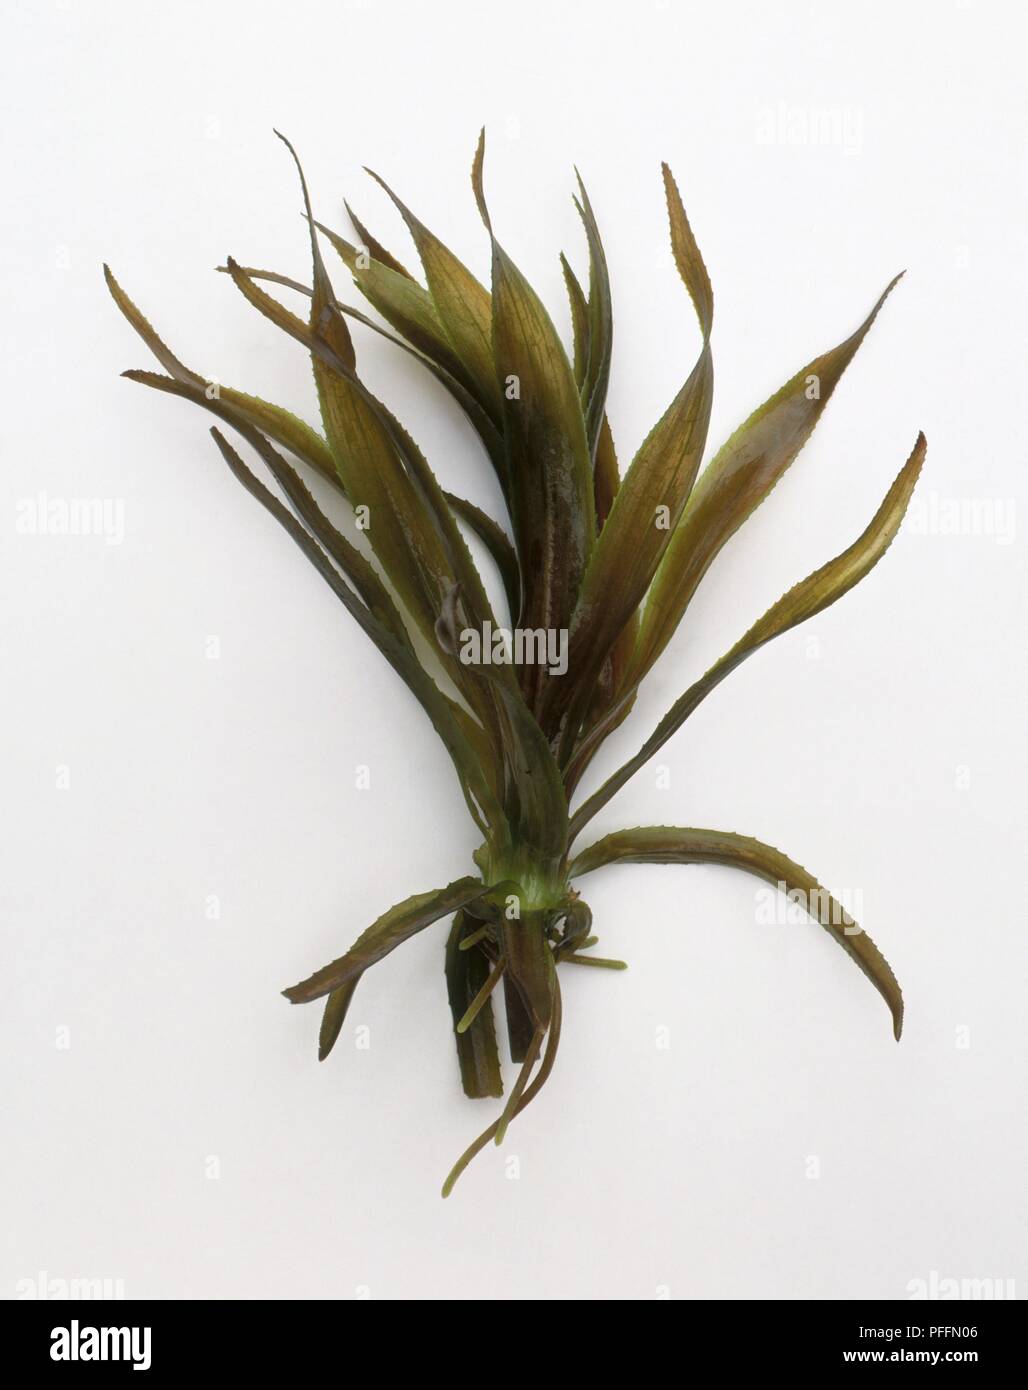 Stratiotes aloides (Water soldier) showing healthy leaves Stock Photo